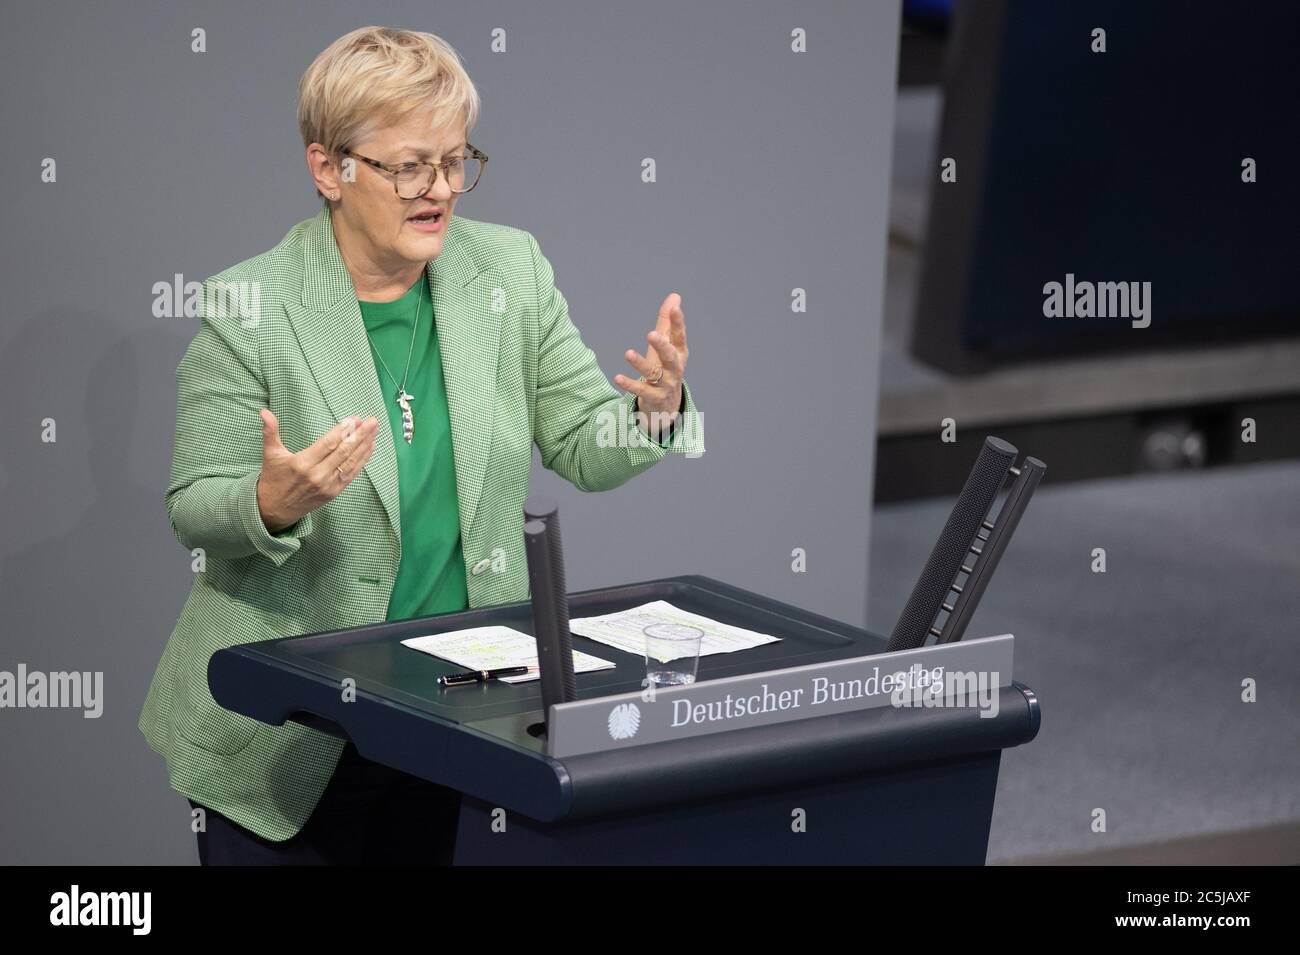 Berlin, Germany. 03rd July, 2020. Renate Künast (Bündnis90/Die Grünen) speaks in the plenary session of the German Bundestag. The main topics of the 171st session of the 19th legislative period are the adoption of the Coal Exit Act, a topical hour on the excesses of violence in Stuttgart, as well as debates on electoral law reform, the protection of electronic patient data, the welfare of farm animals and the German chairmanship of the UN Security Council. Credit: Christophe Gateau/dpa/Alamy Live News Stock Photo